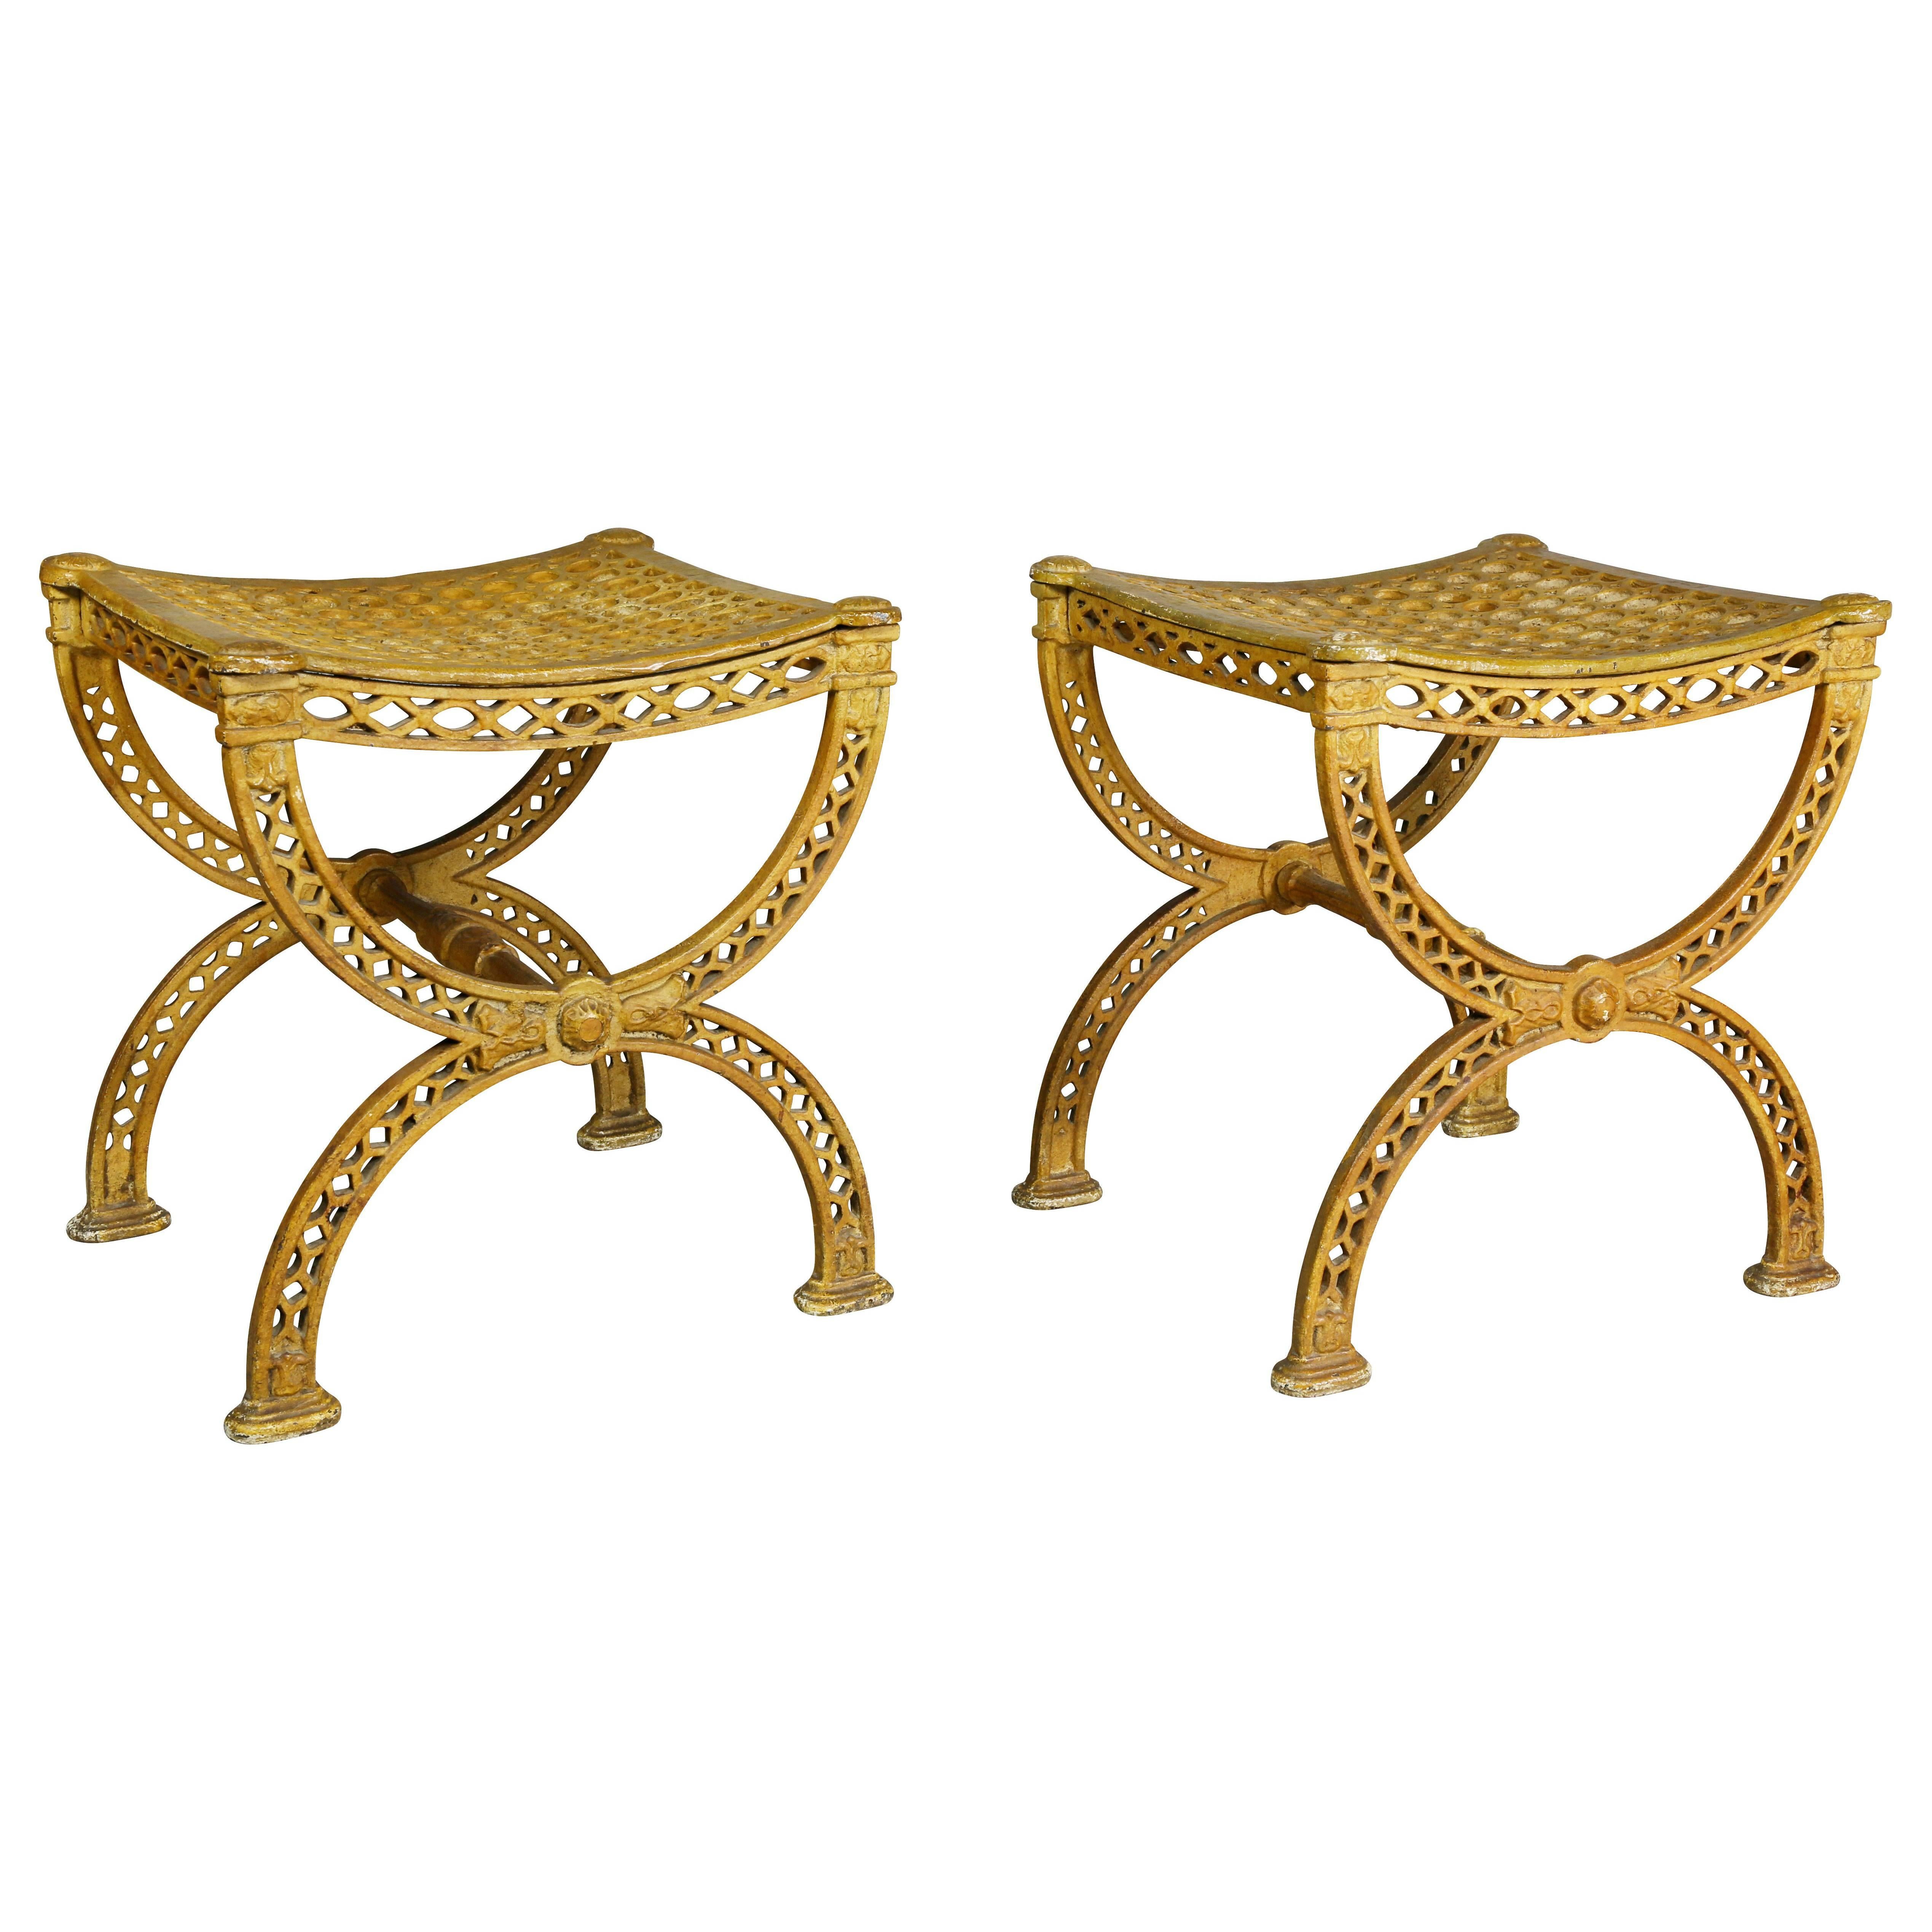 Pair of Neoclassic Yellow Painted Cast Iron Stools